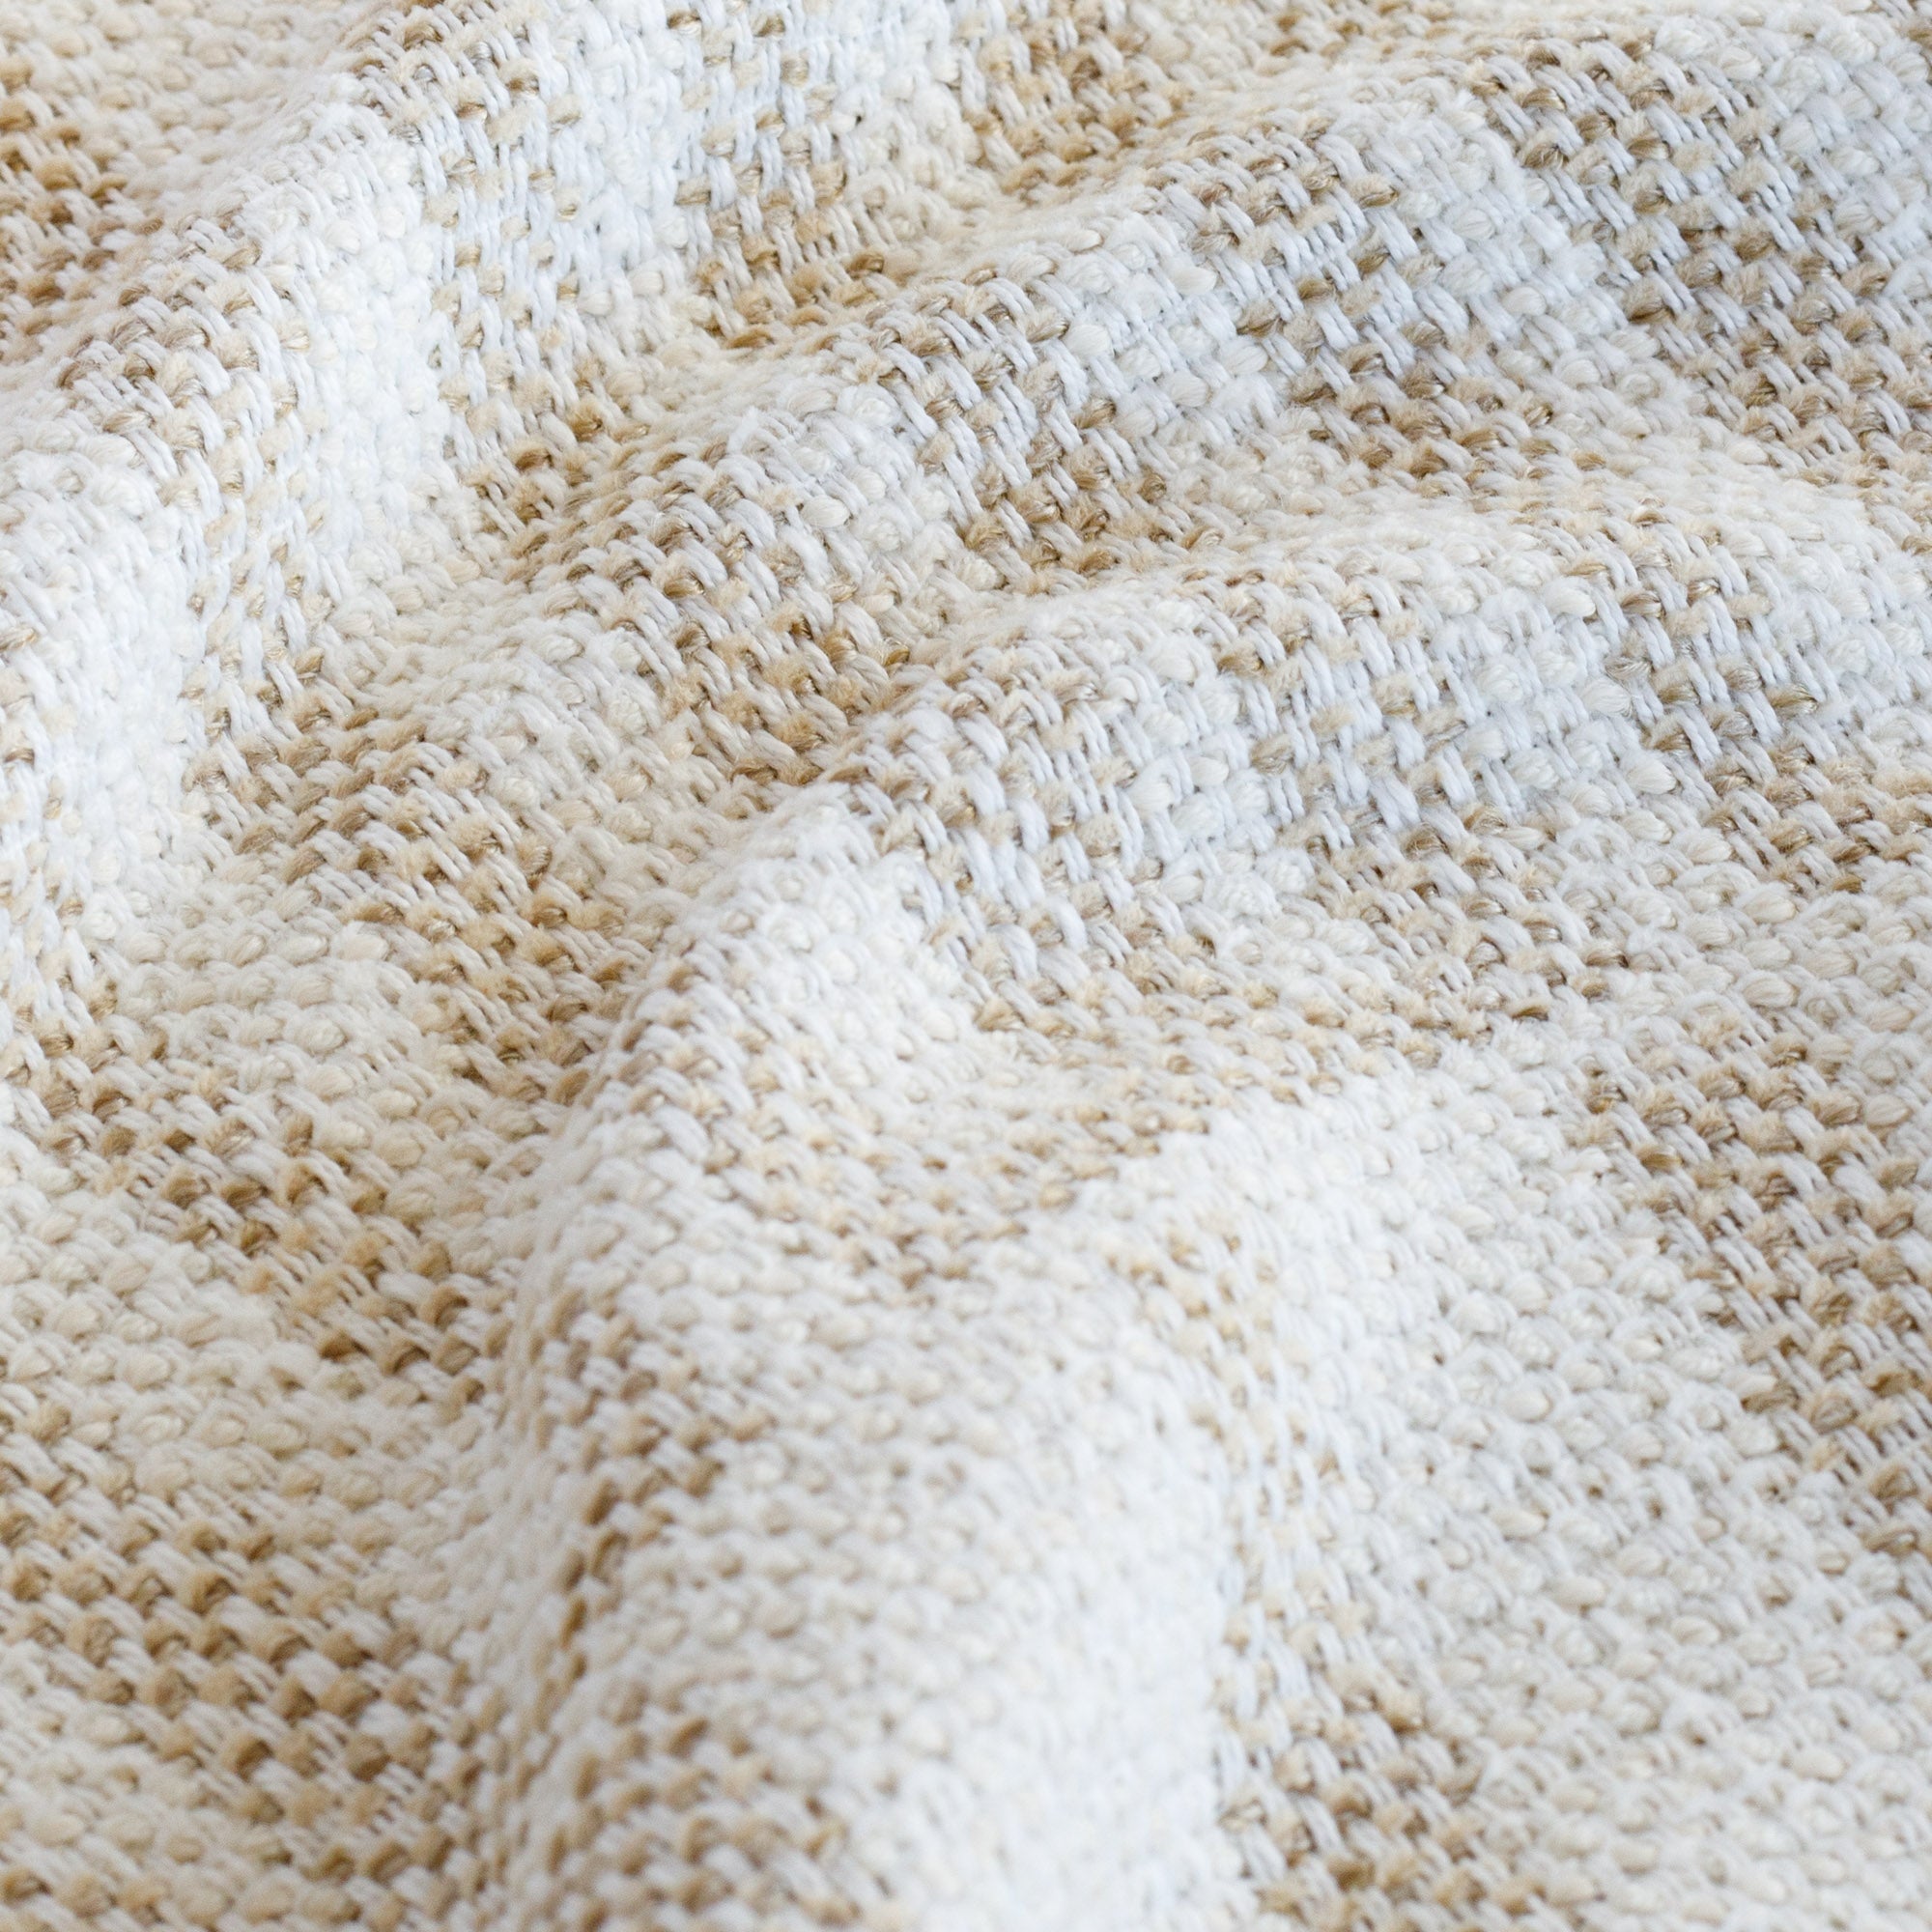 a beige and white outdoor upholstery fabric : close up view